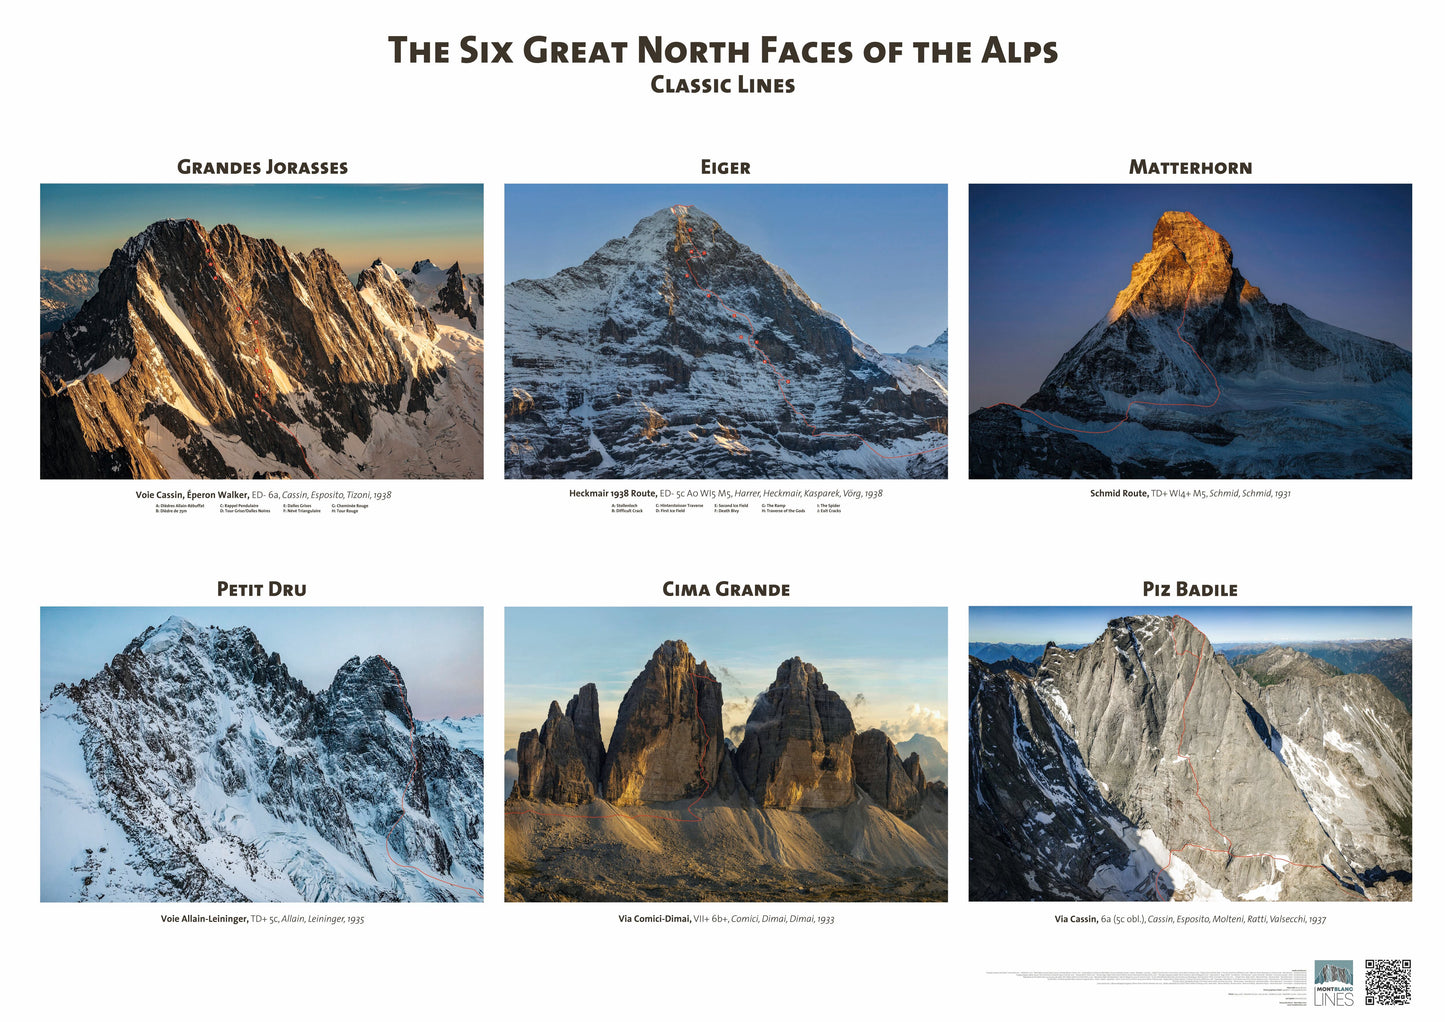 The Six Great North Faces of the Alps